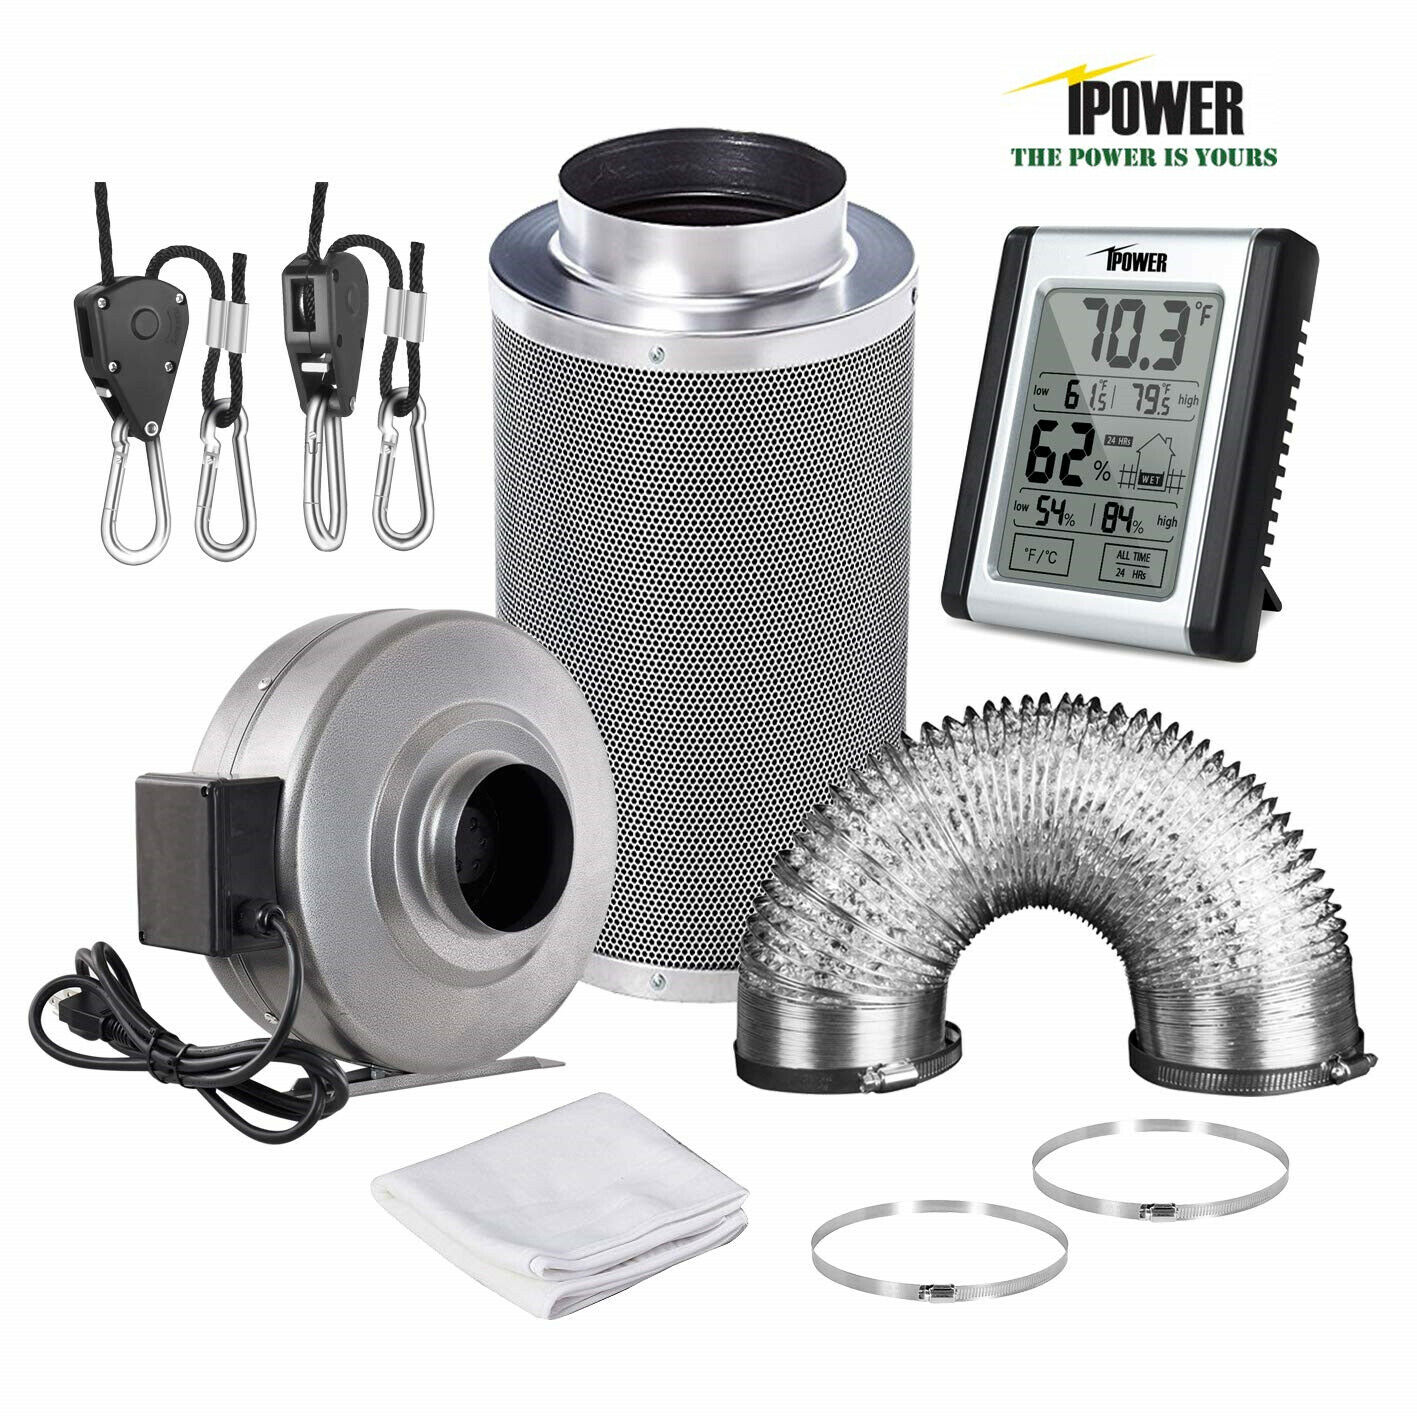 iPower 4''/6''/8'' Inch Inline Fan Carbon Filter Ducting & Humidity Monitor